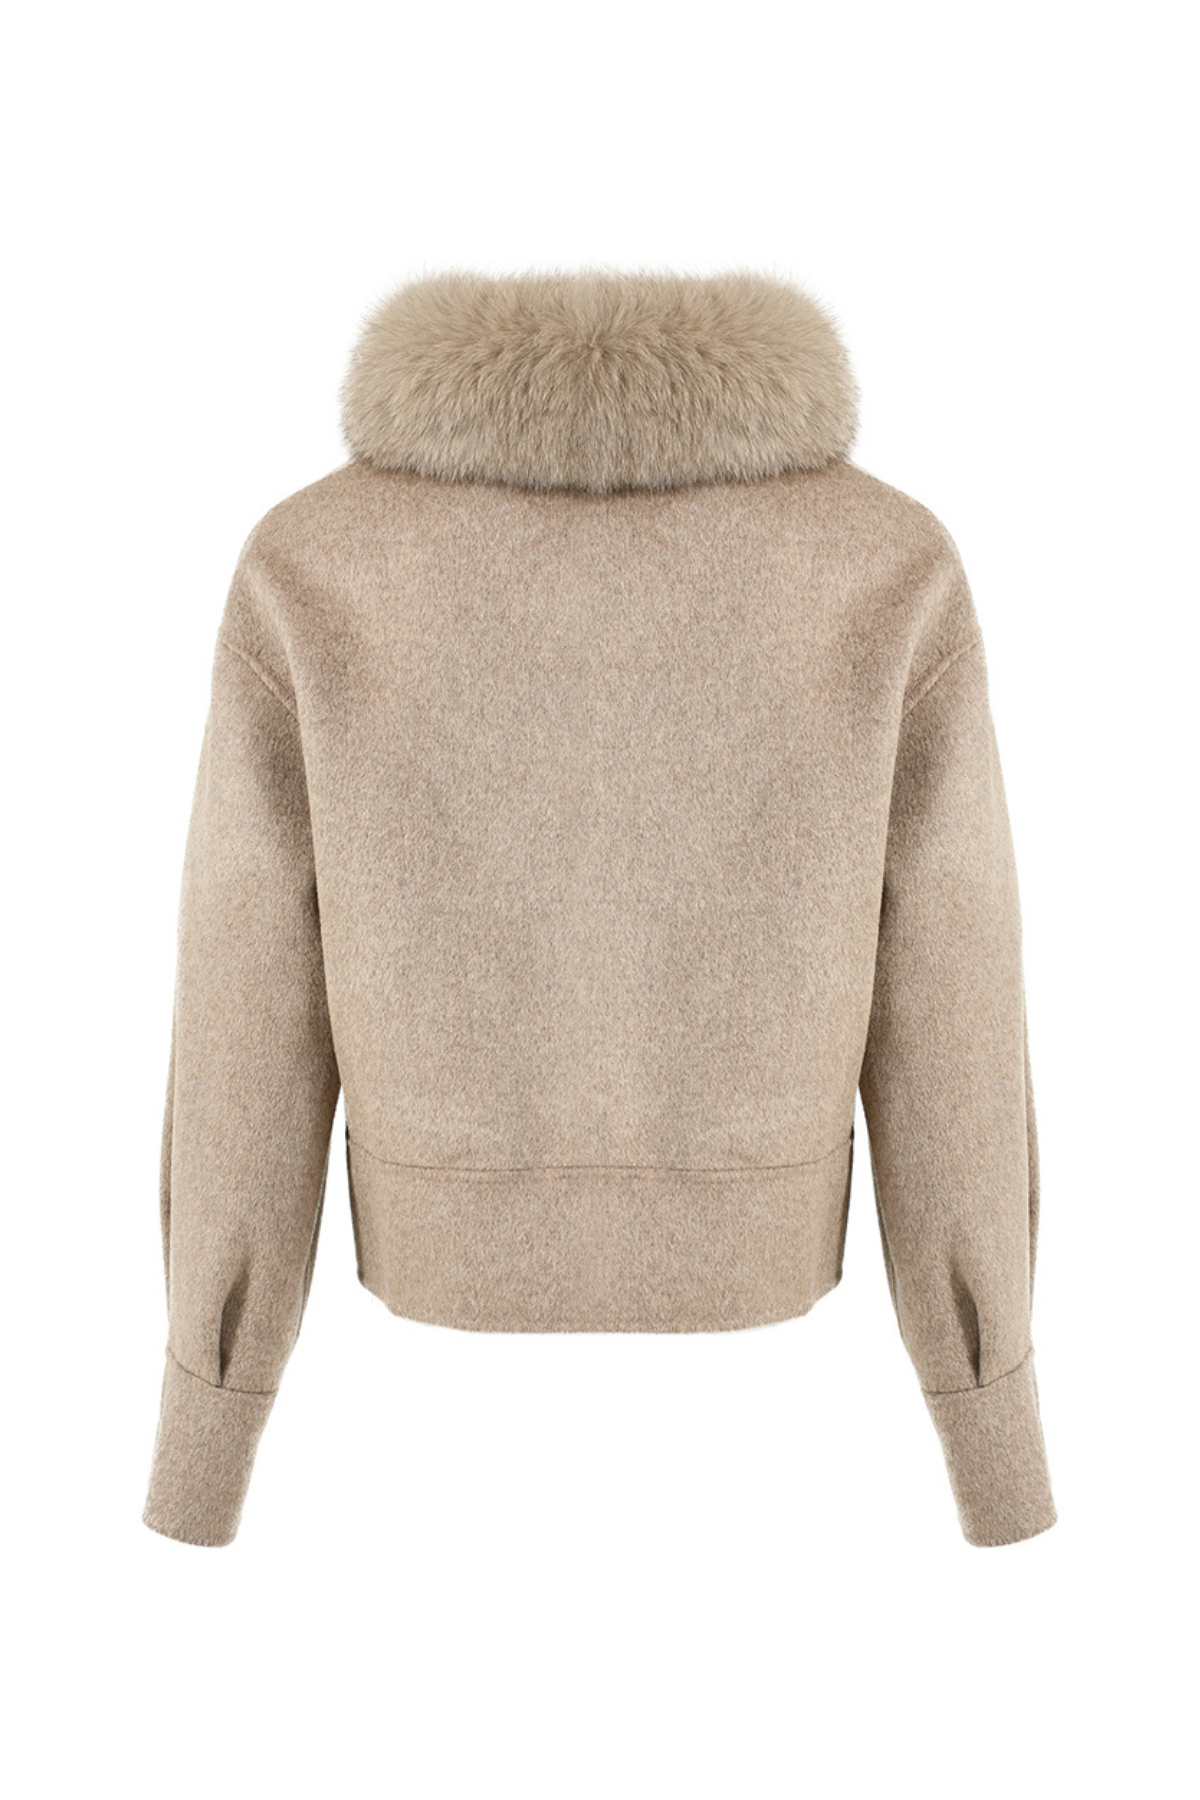 Hampstead Cashmere Jacket Fawn